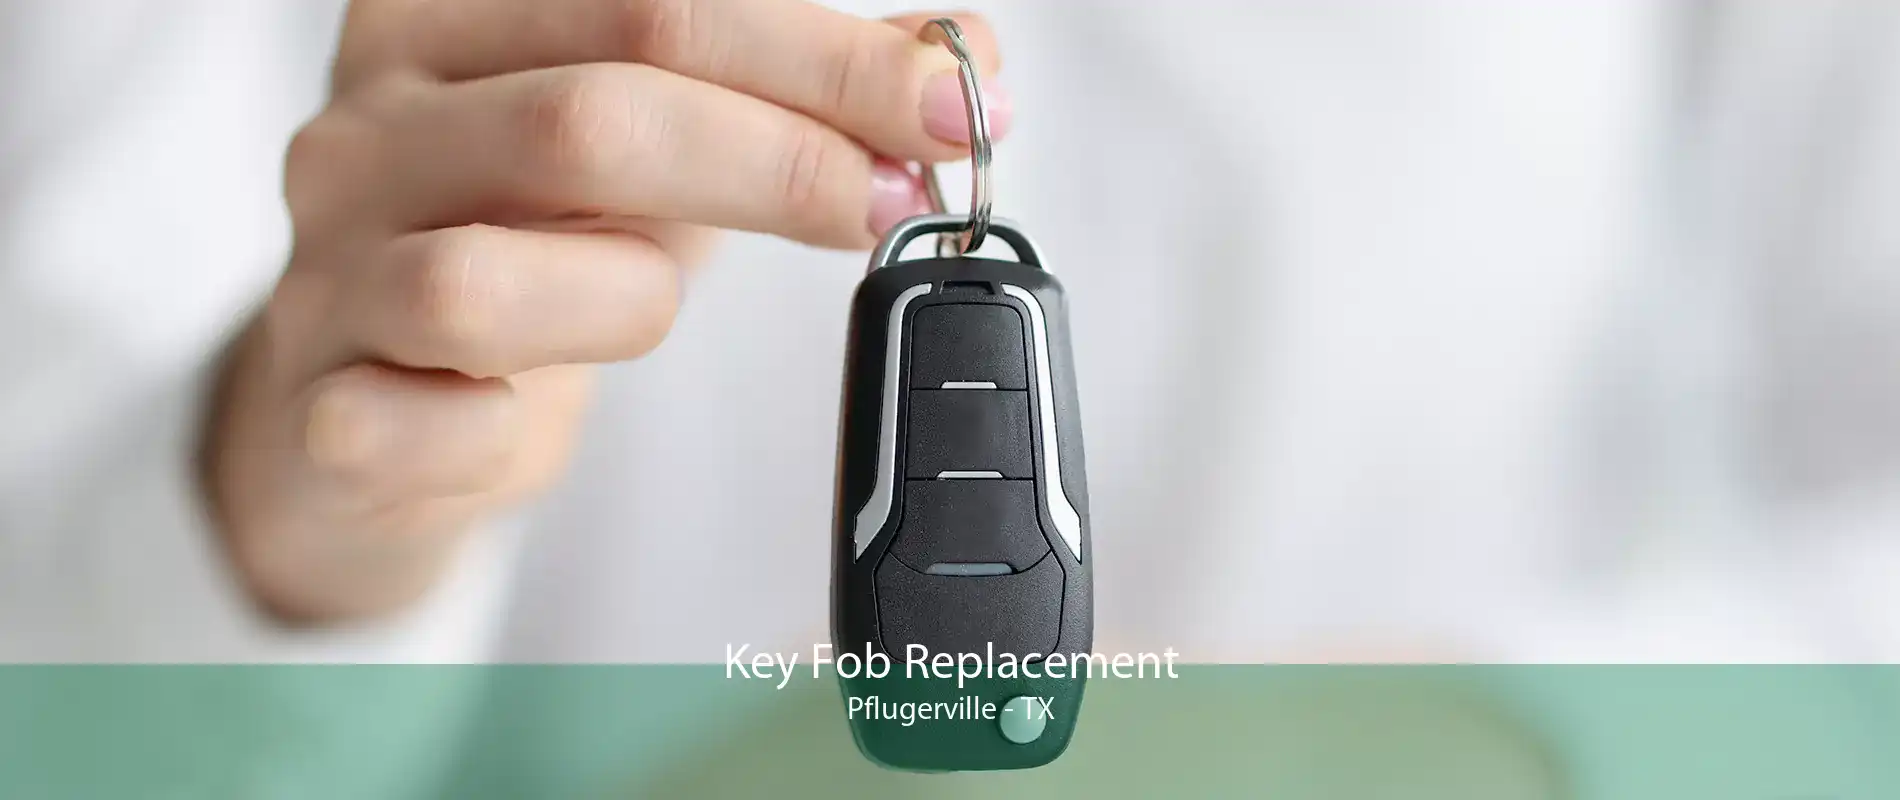 Key Fob Replacement Pflugerville - TX